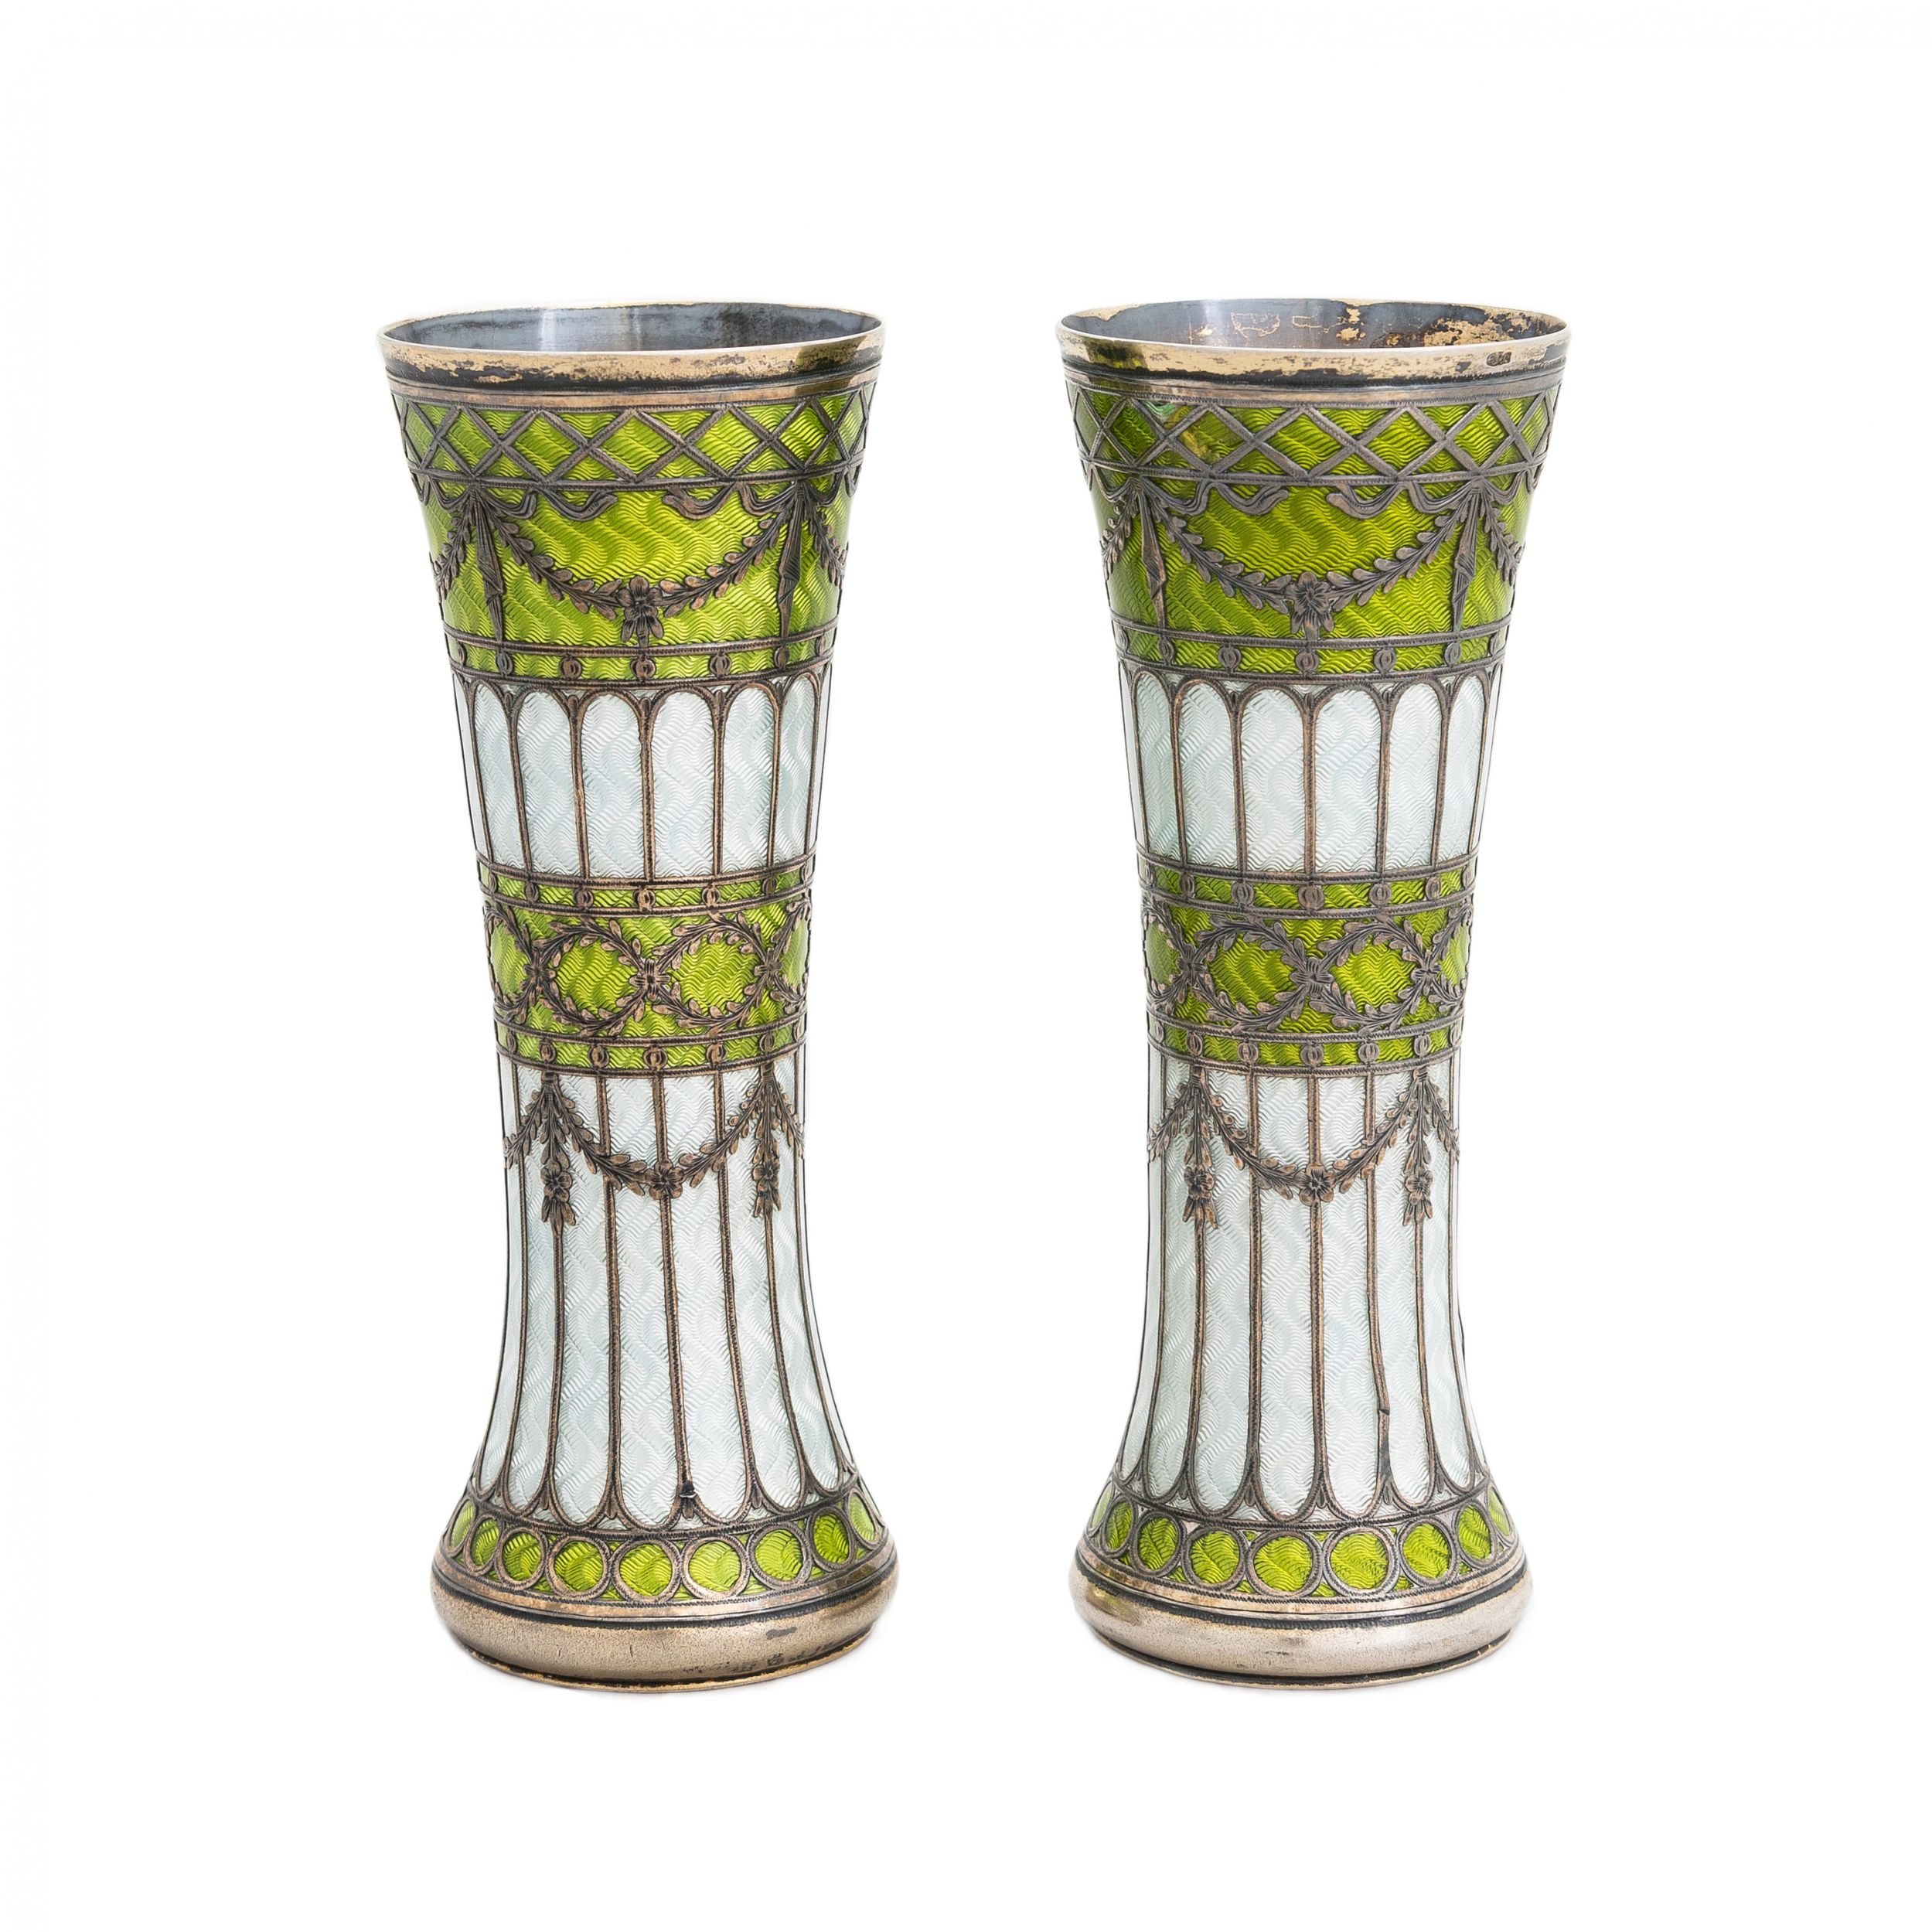 A-pair-of-vases-buds-of-gilded-silver-and-guilloché-enamel-early-20th-century-